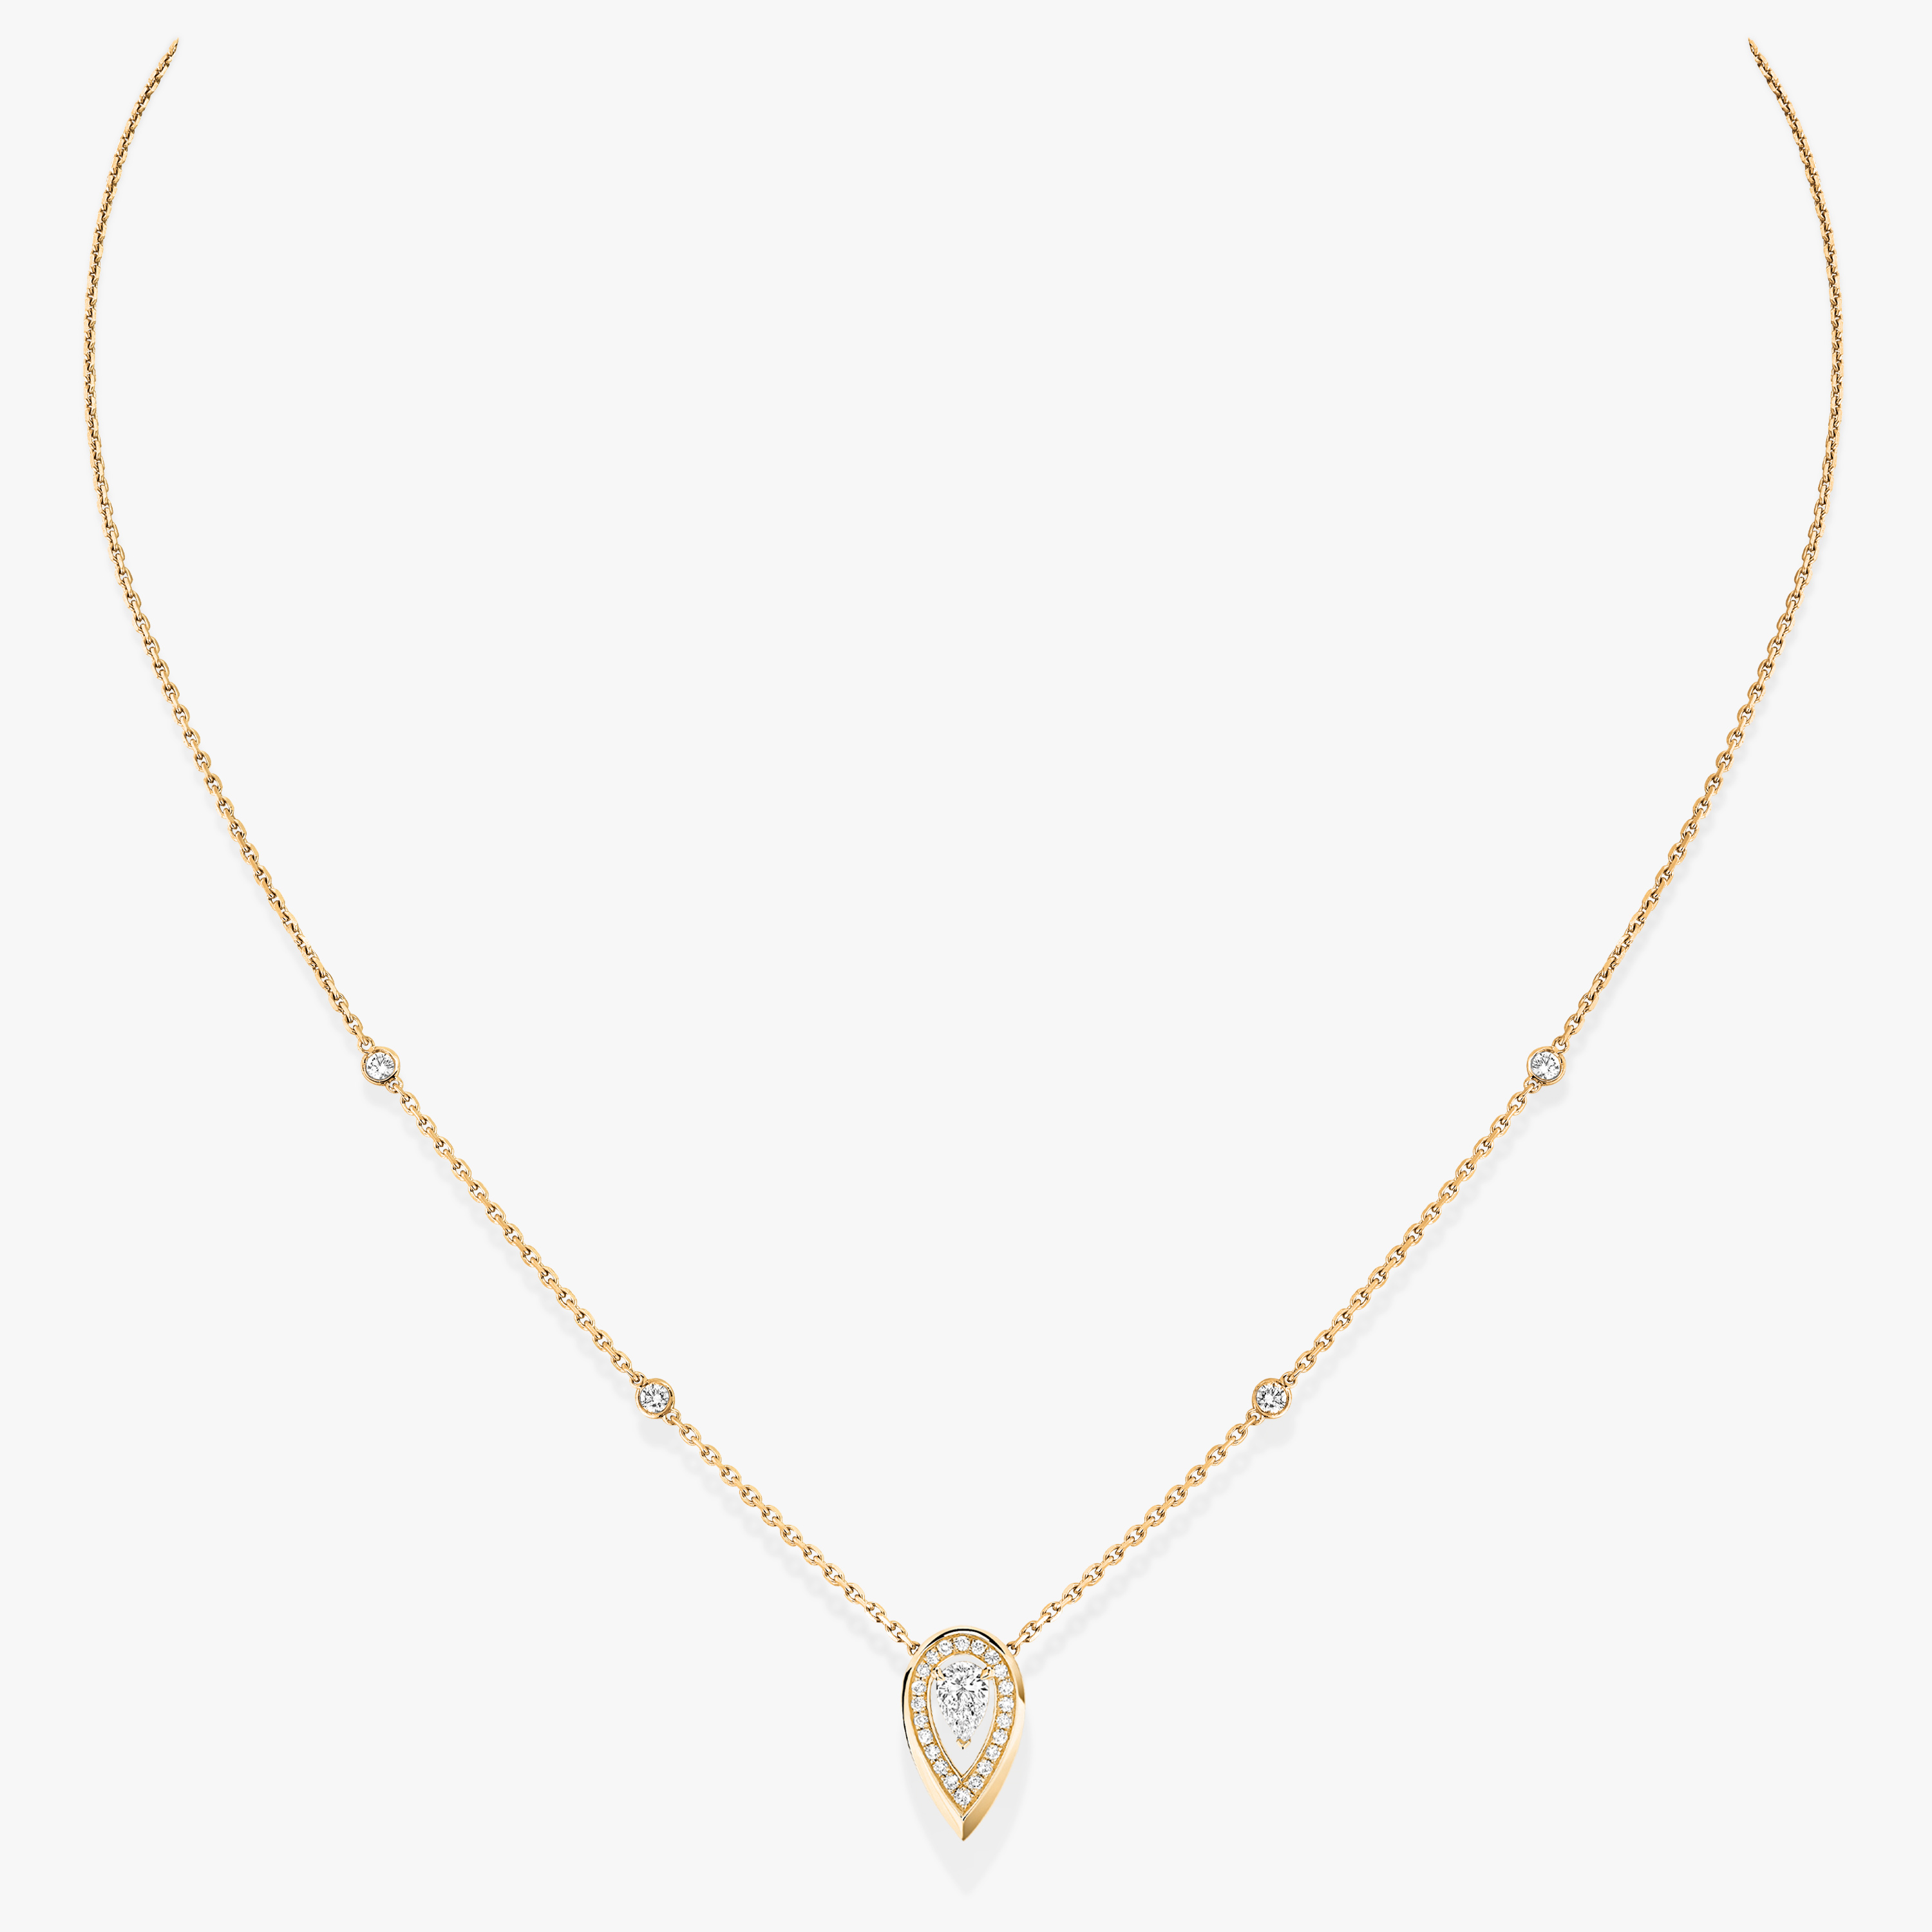 Necklace For Her Yellow Gold Diamond Fiery 0.10ct 12611-YG